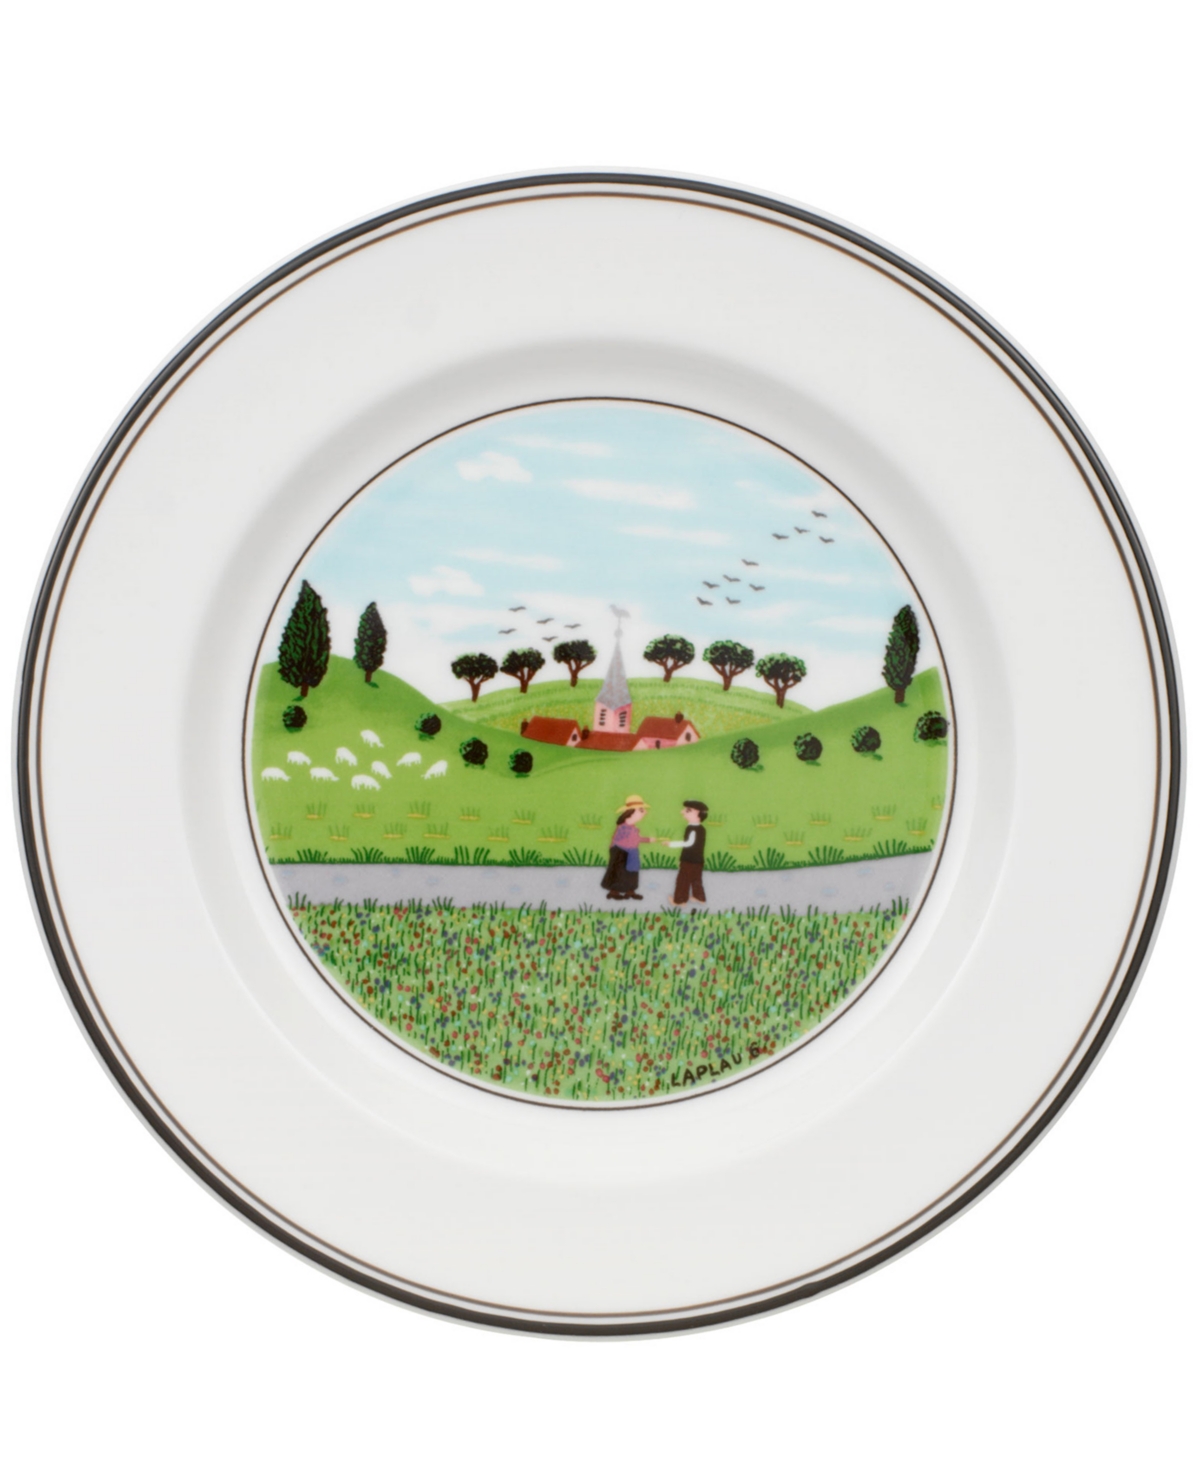 Design Naif Bread and Butter Plate Boy & Girl